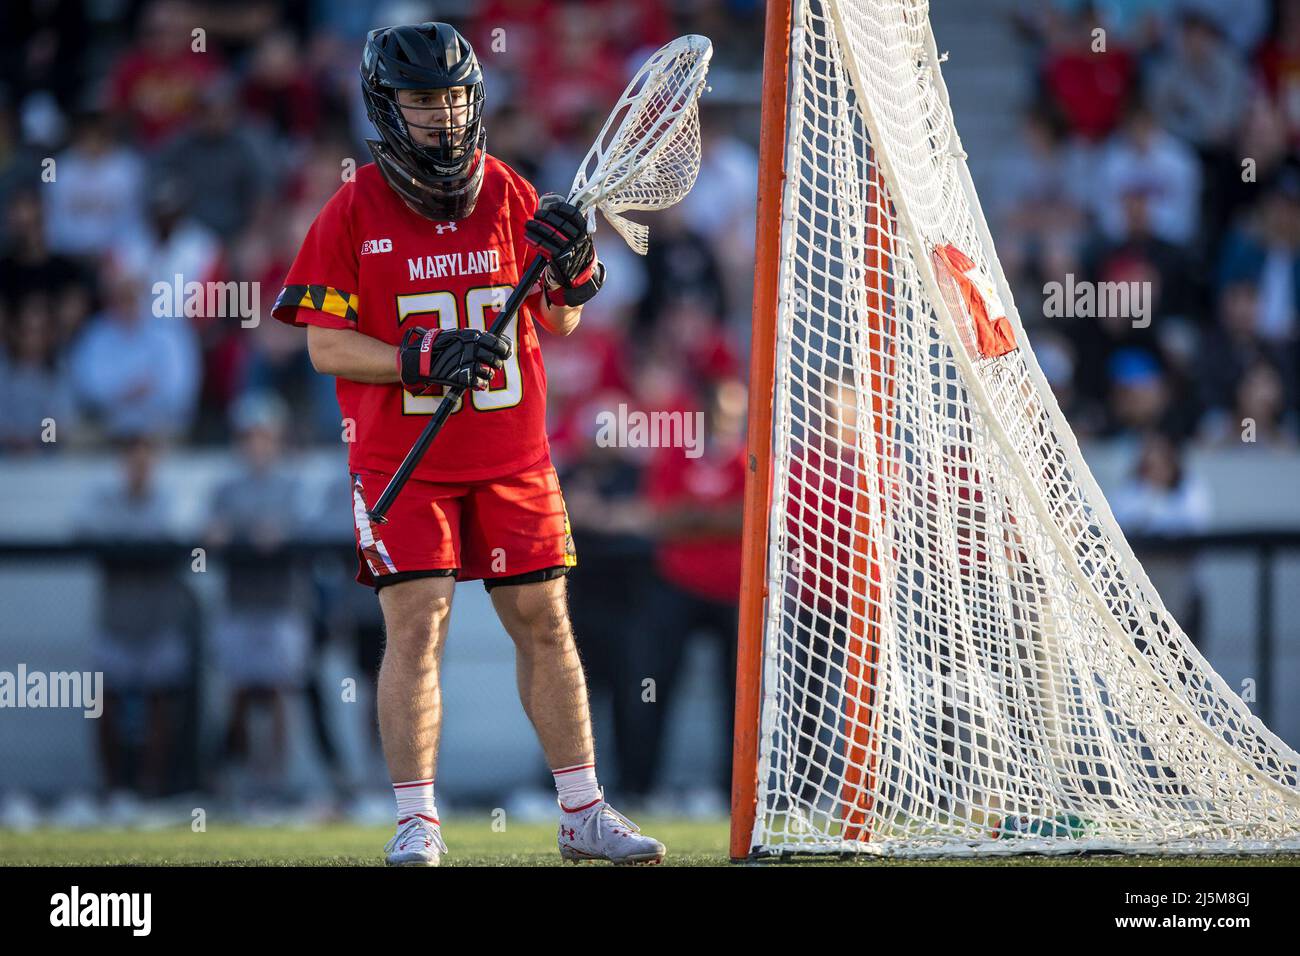 April 23, 2022: Maryland goalie Logan McNaney (30) in goal during the ncaa men's lacrosse regular season finale between the Maryland Terrapins and the Johns Hopkins Blue Jays at Homewood Field in Baltimore, Maryland Photographer: Cory Royster Stock Photo